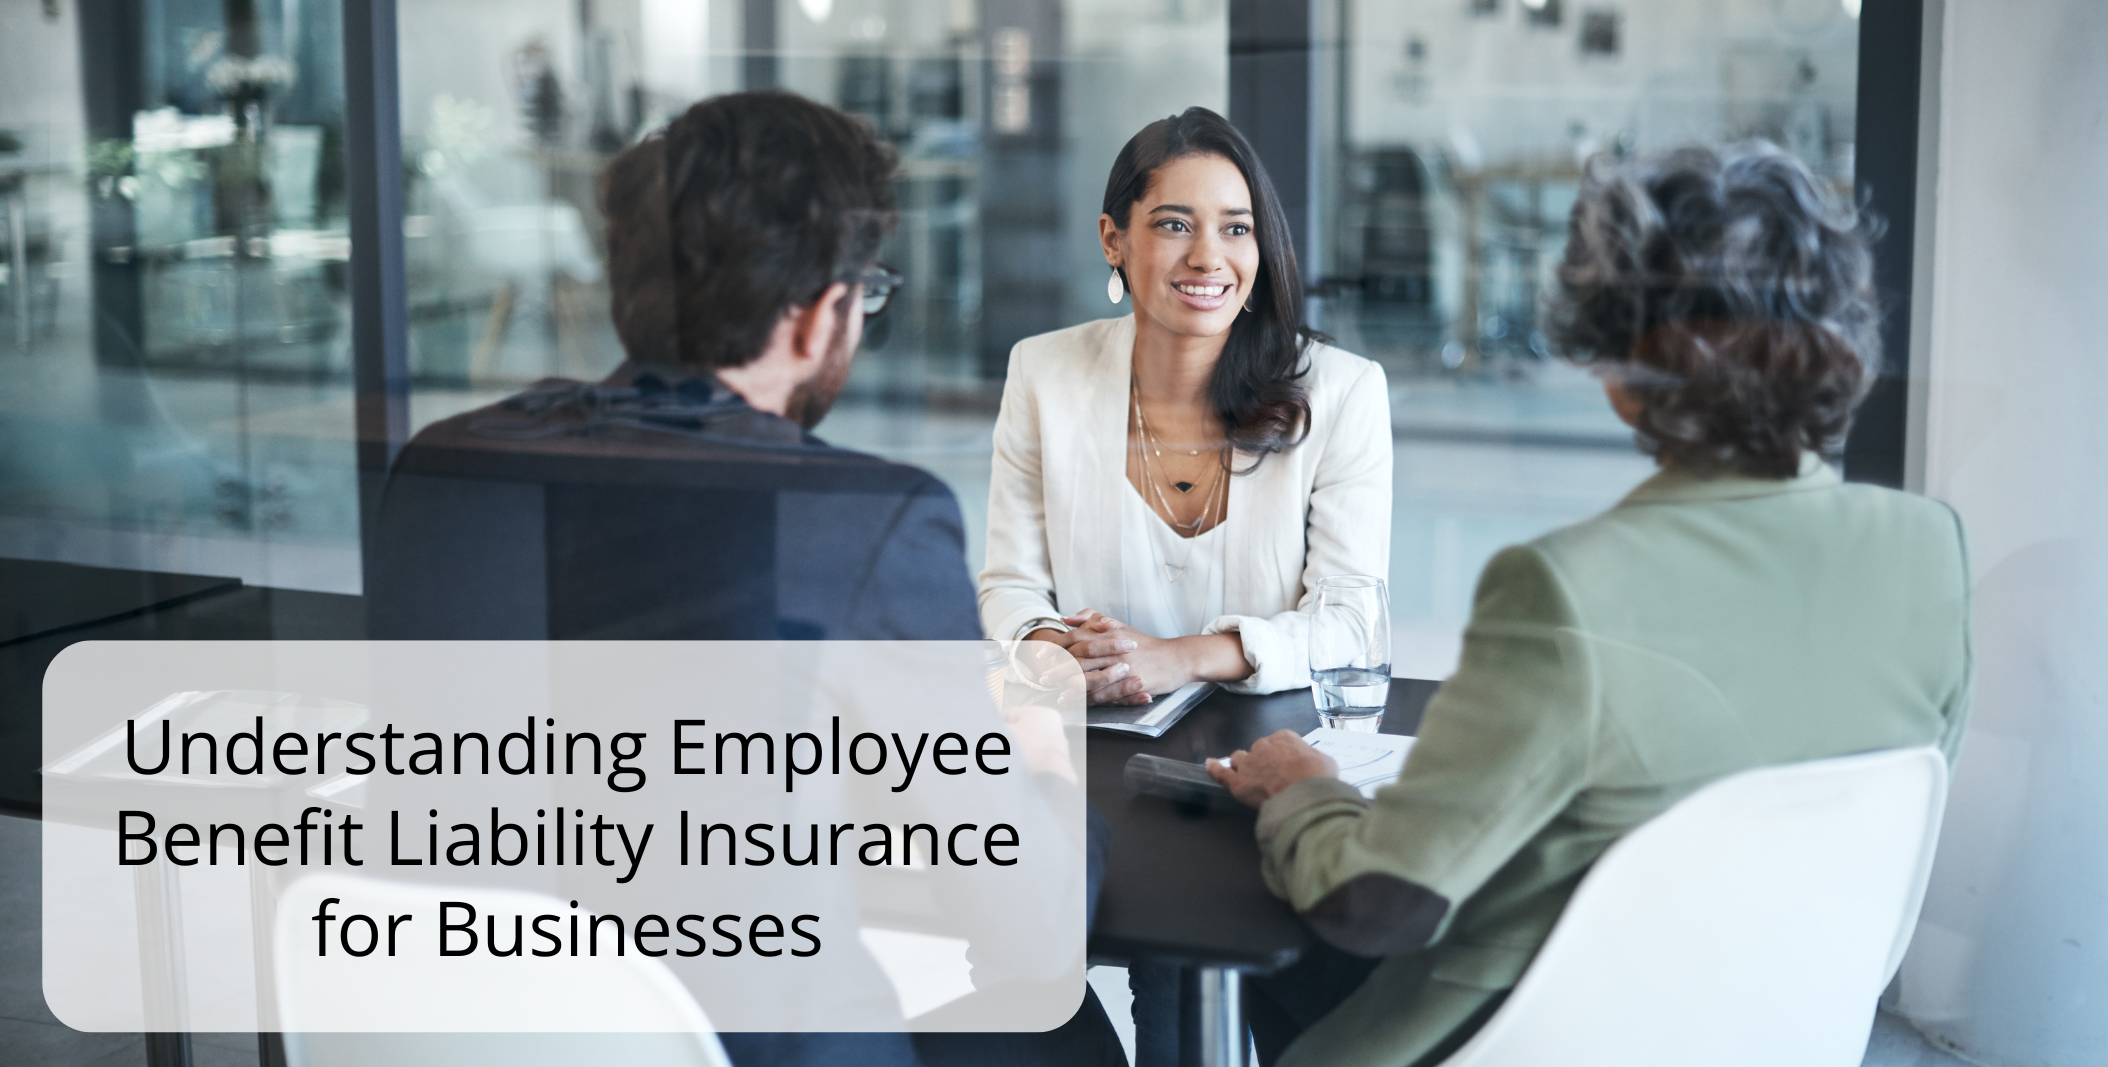 Understanding Employee Benefit Liability Insurance for Businesses